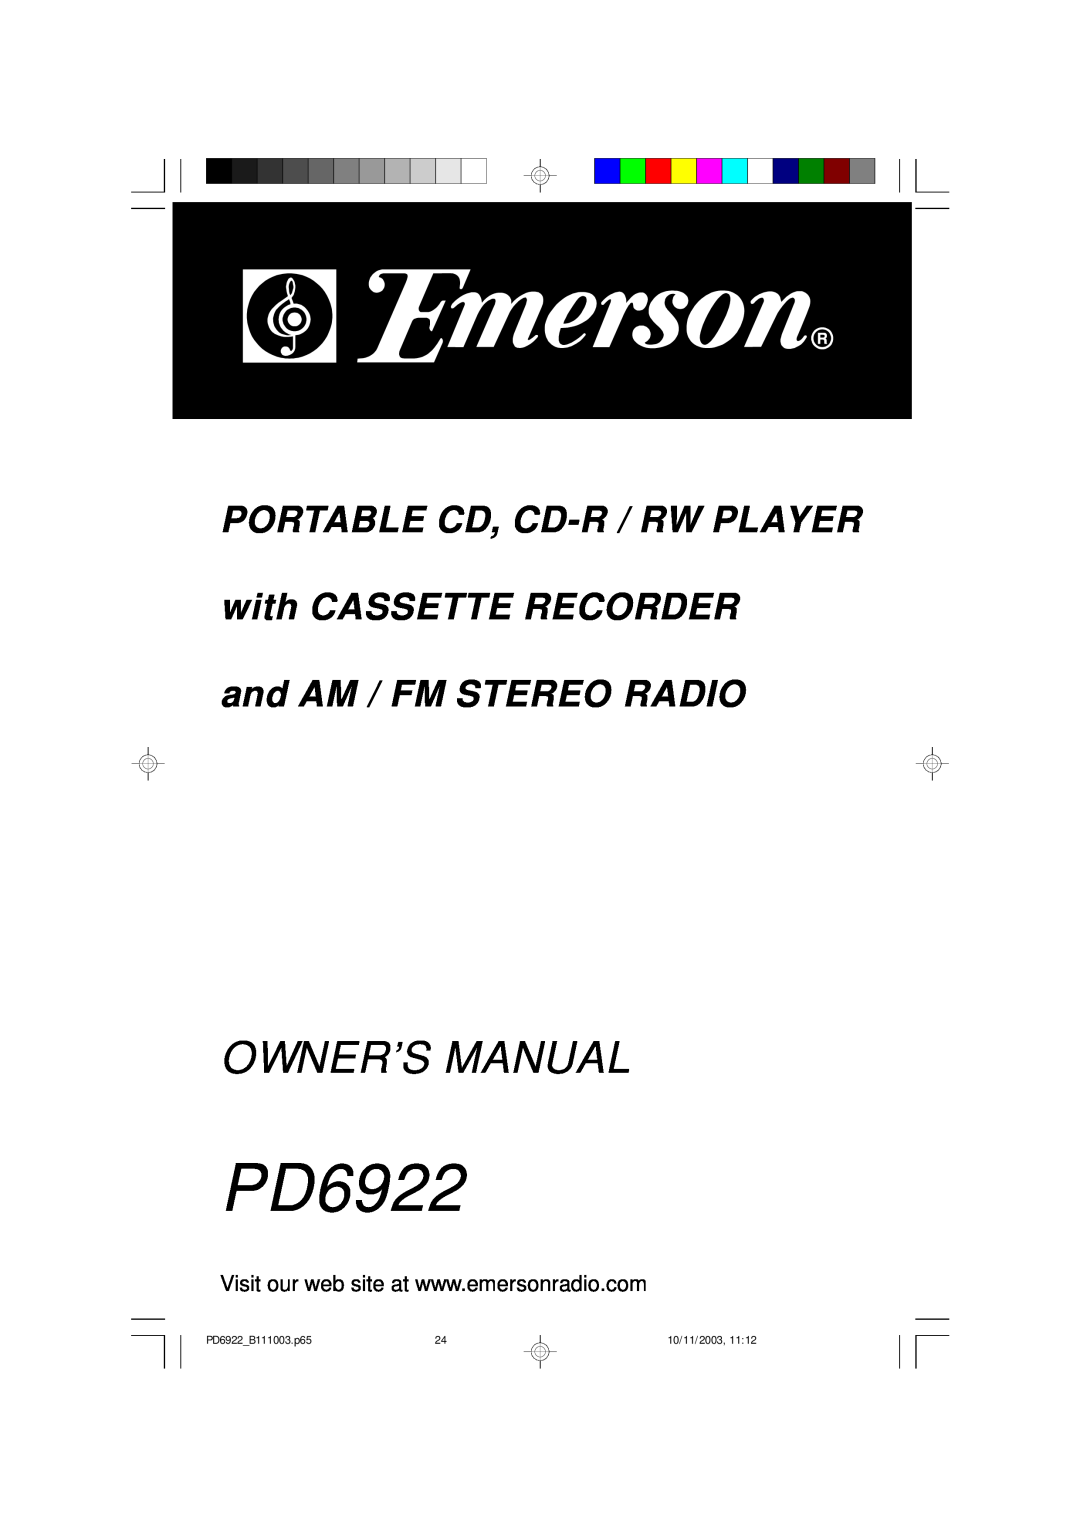 Emerson PD6922 owner manual Portable Cd, Cd-R /Rw Player, with CASSETTE RECORDER and AM / FM STEREO RADIO, 10/11/2003 